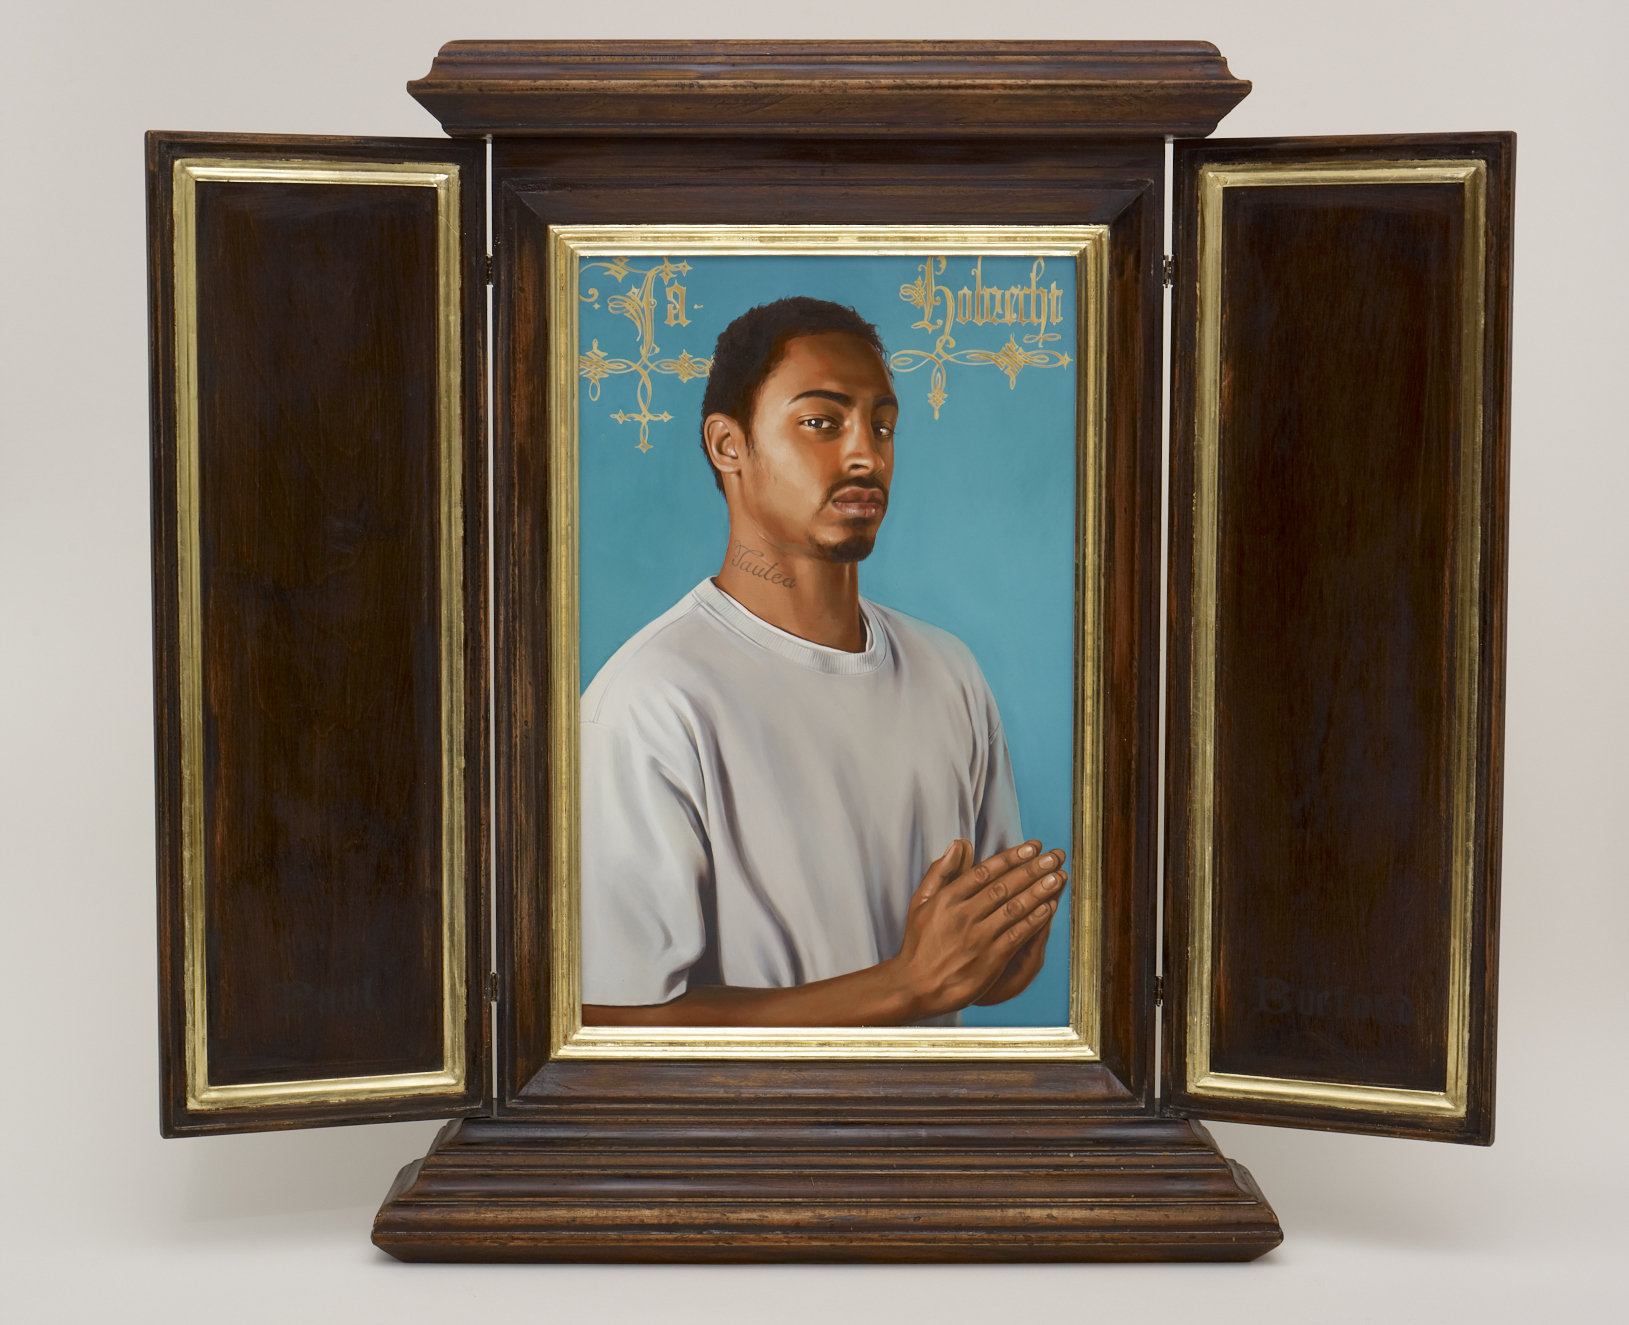 kehindewiley_a new republic_After Memling’s Portrait of Jacob Obrecht